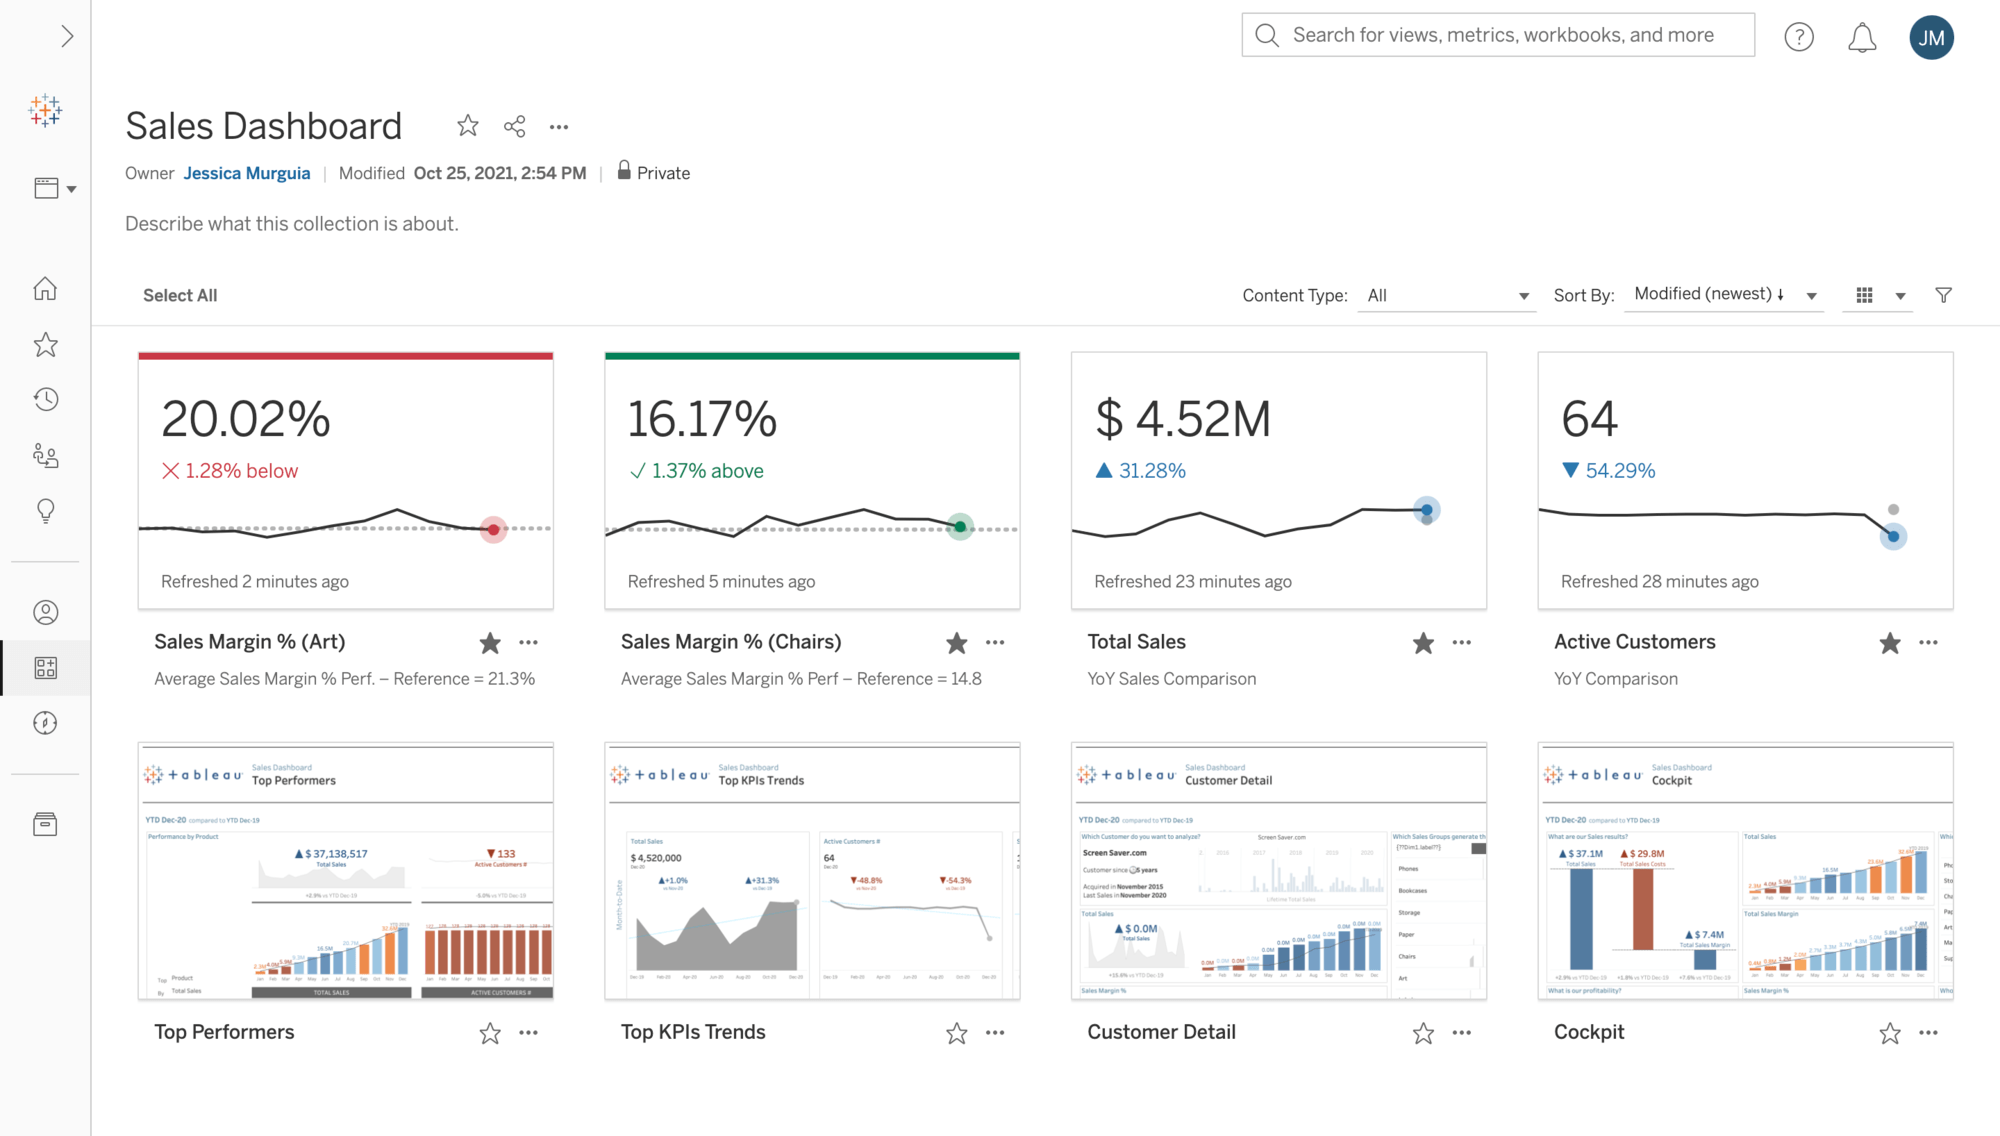 Within the Tableau interface, a selection of Metrics are shown with new color indicators and appearing in a Collection related to sales dashboards